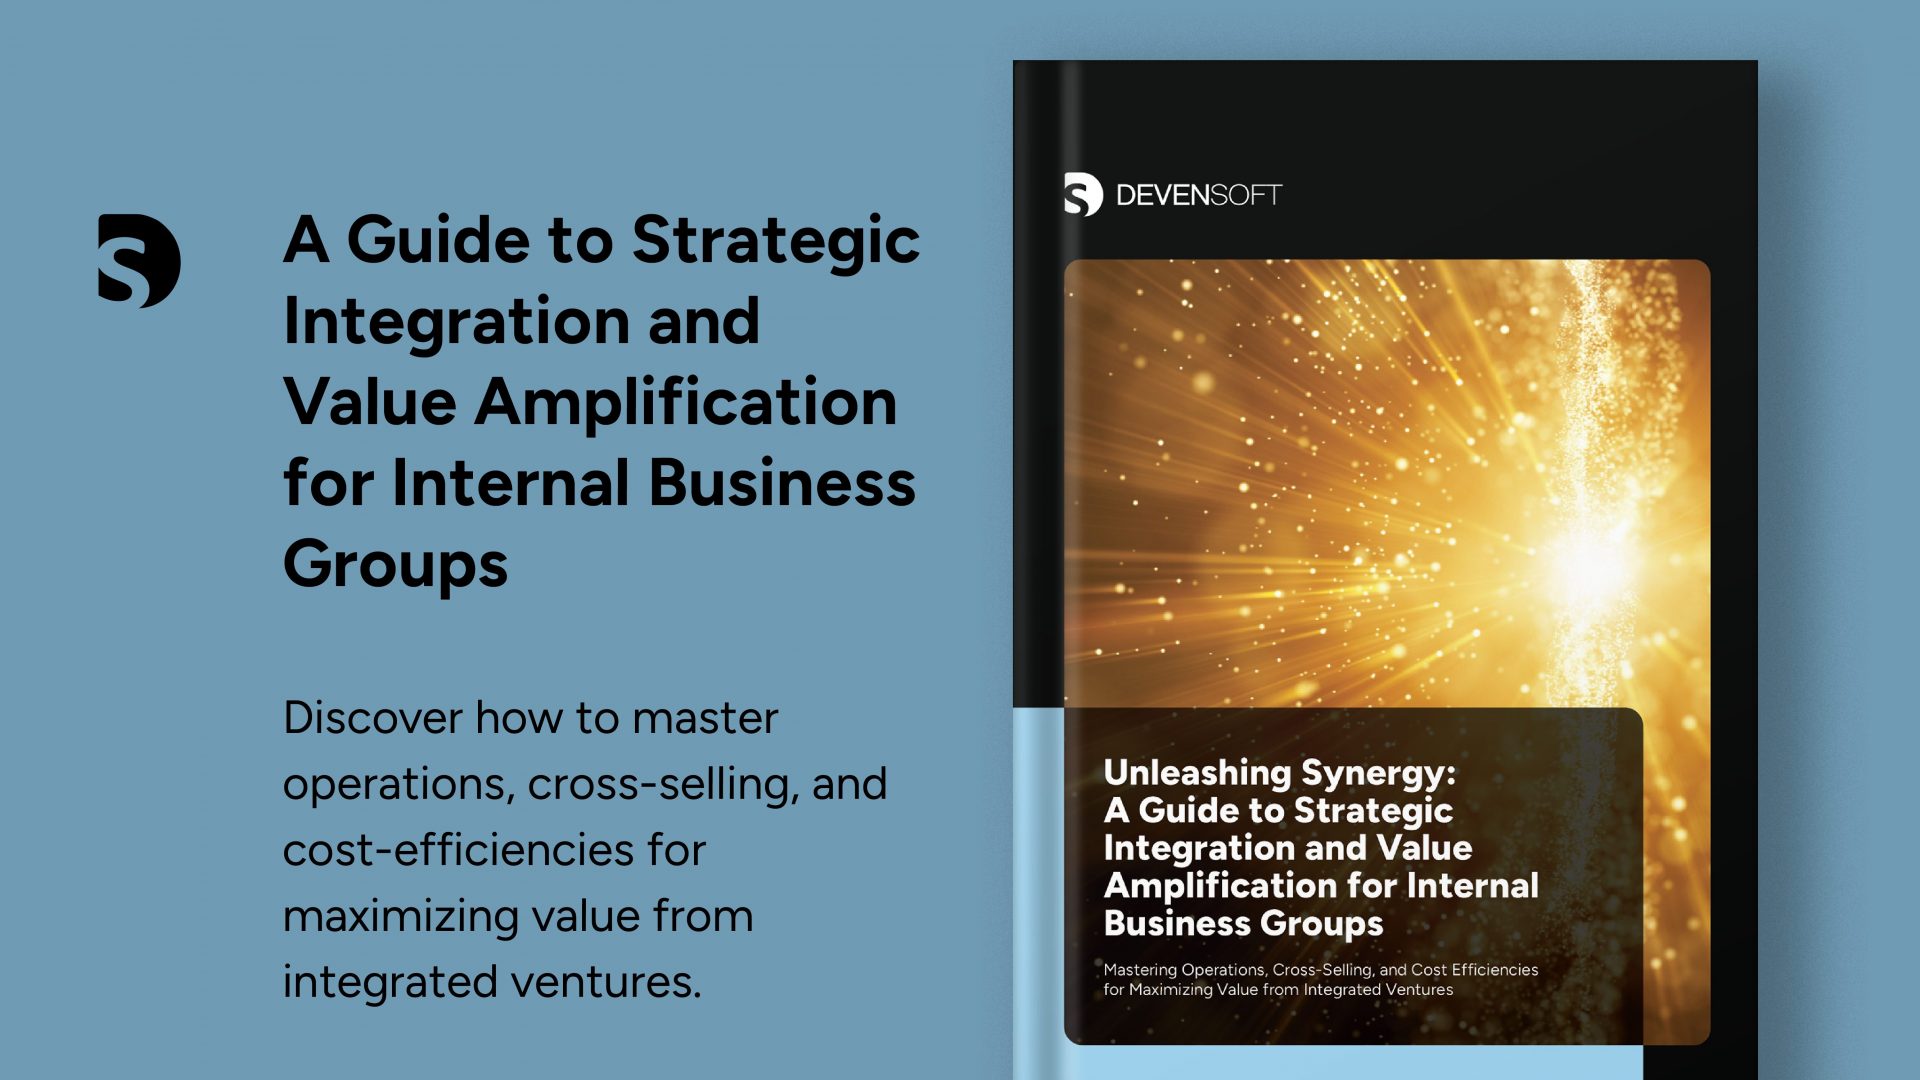 Unleashing Synergy: A Guide to Strategic Integration and Value Amplification for Internal Business Groups